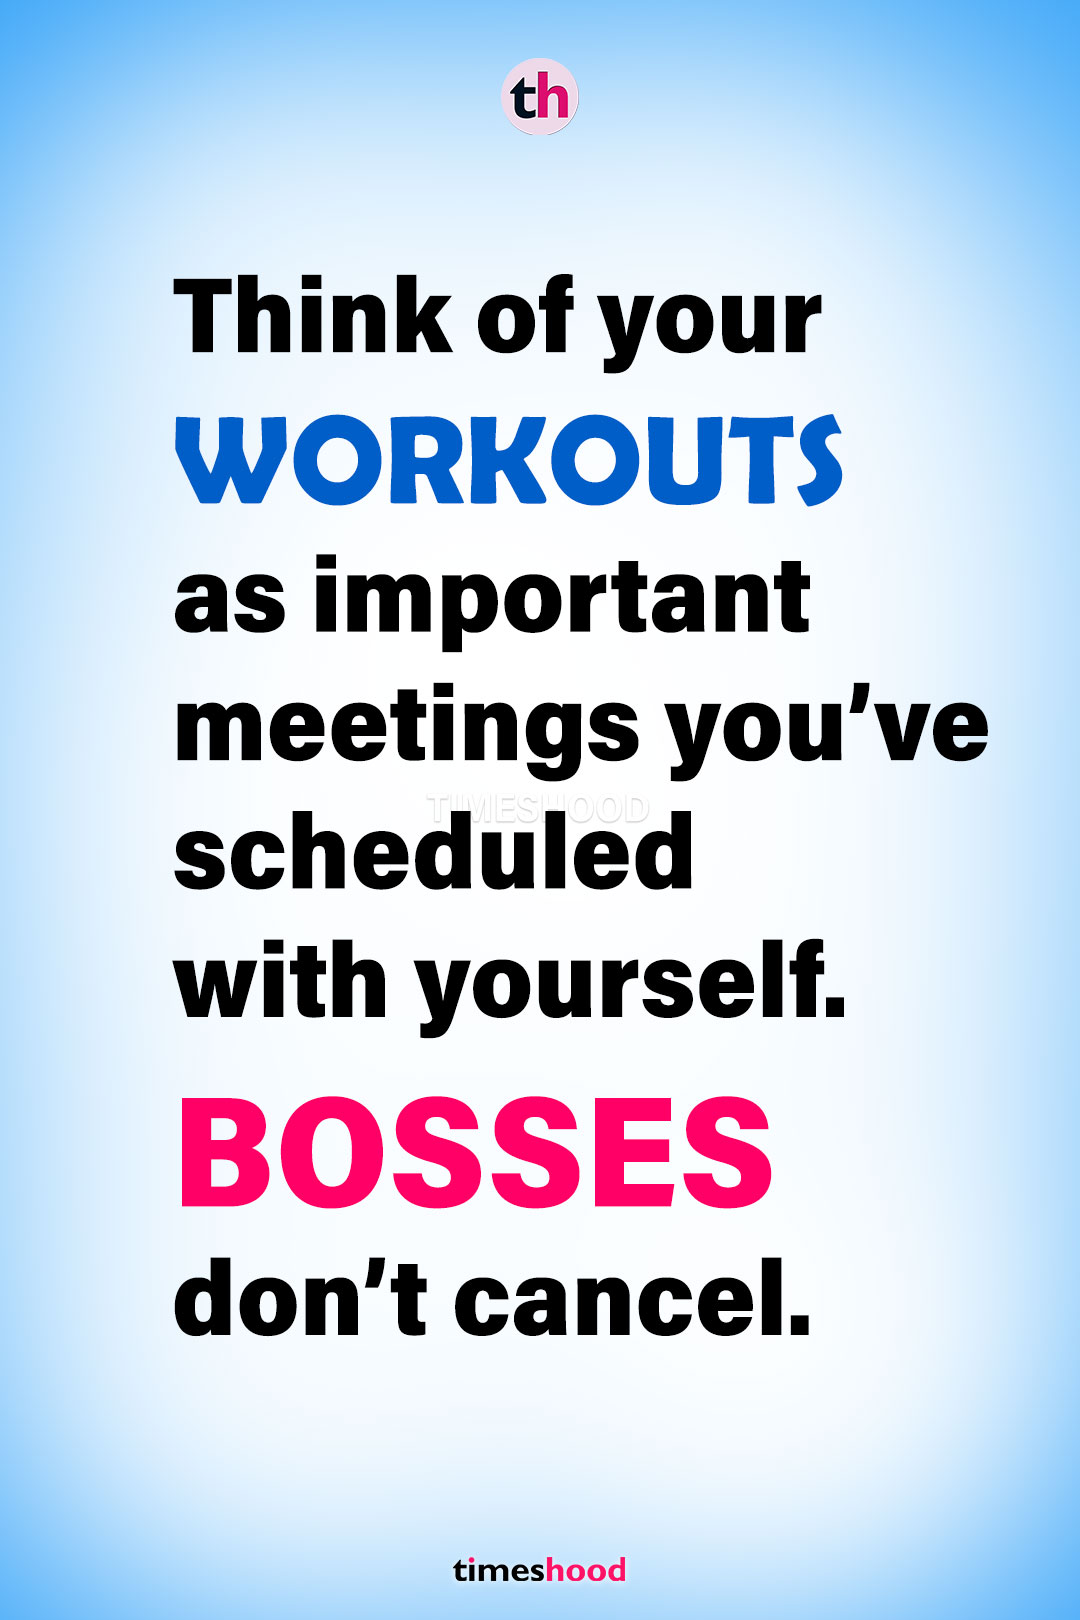 workouts as important meetings - motivational fitness quotes